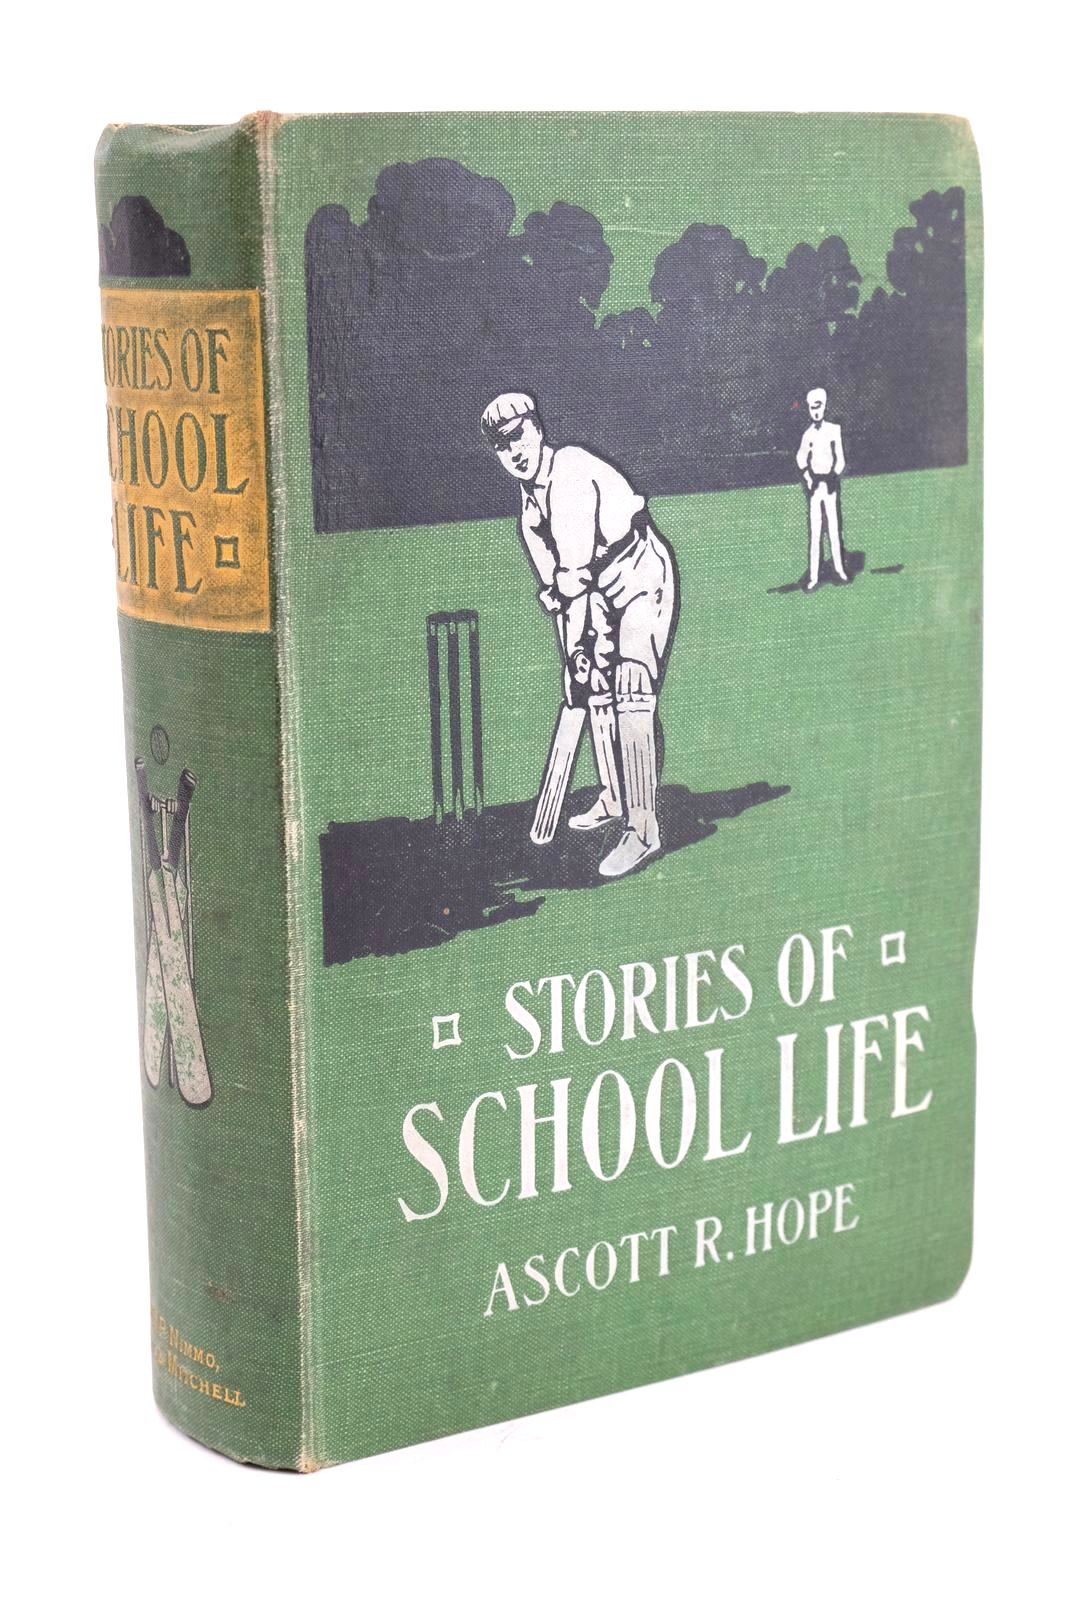 Photo of STORIES OF SCHOOL LIFE written by Hope, Ascott R. published by W.P. Nimmo, Hay & Mitchell (STOCK CODE: 1324463)  for sale by Stella & Rose's Books